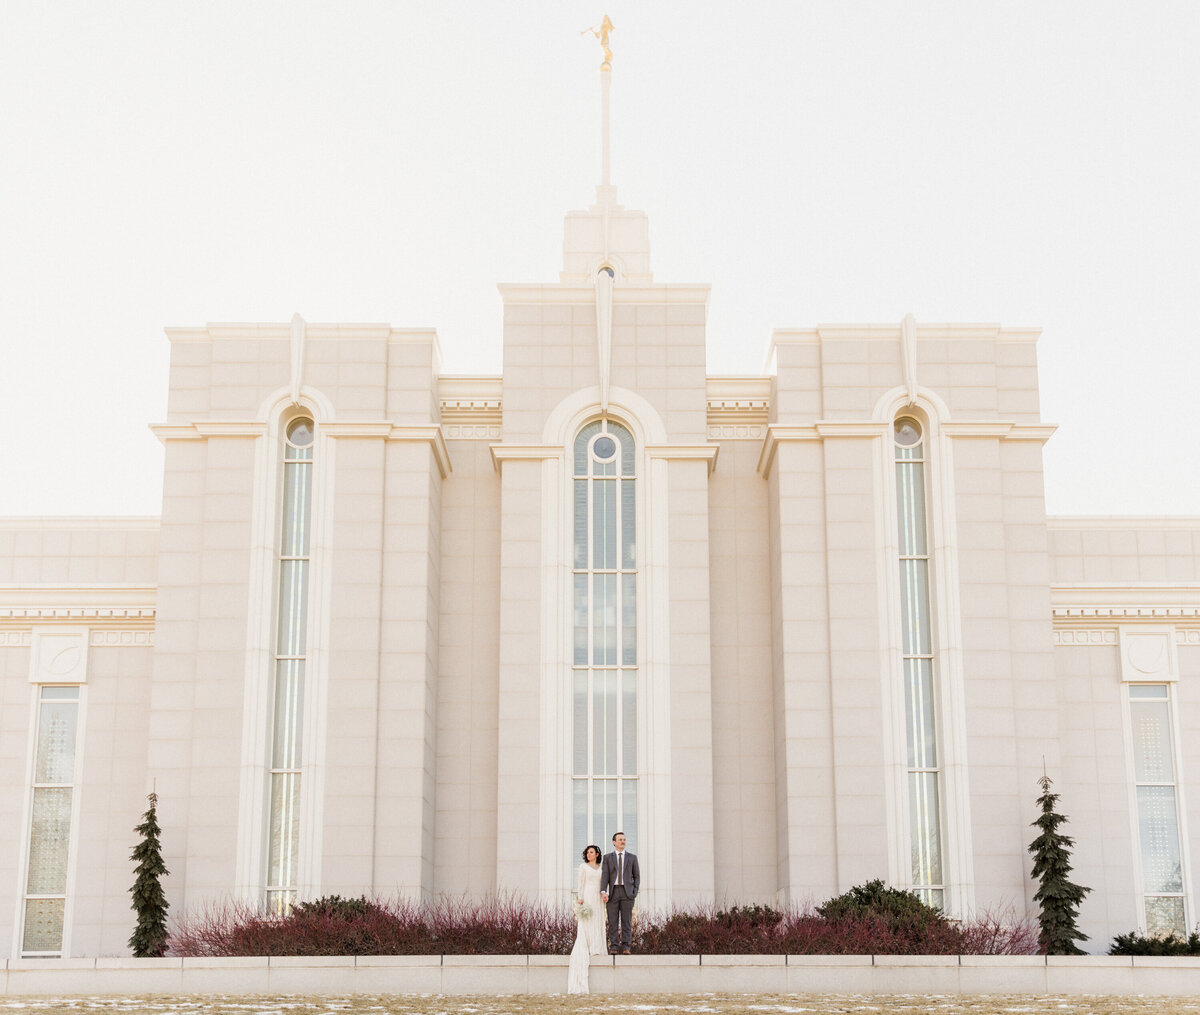 Utah Wedding Photographer takes a photo of the newly sealed bride and groom outside of the temple in a dramatic pose of them both looking opposite directions.